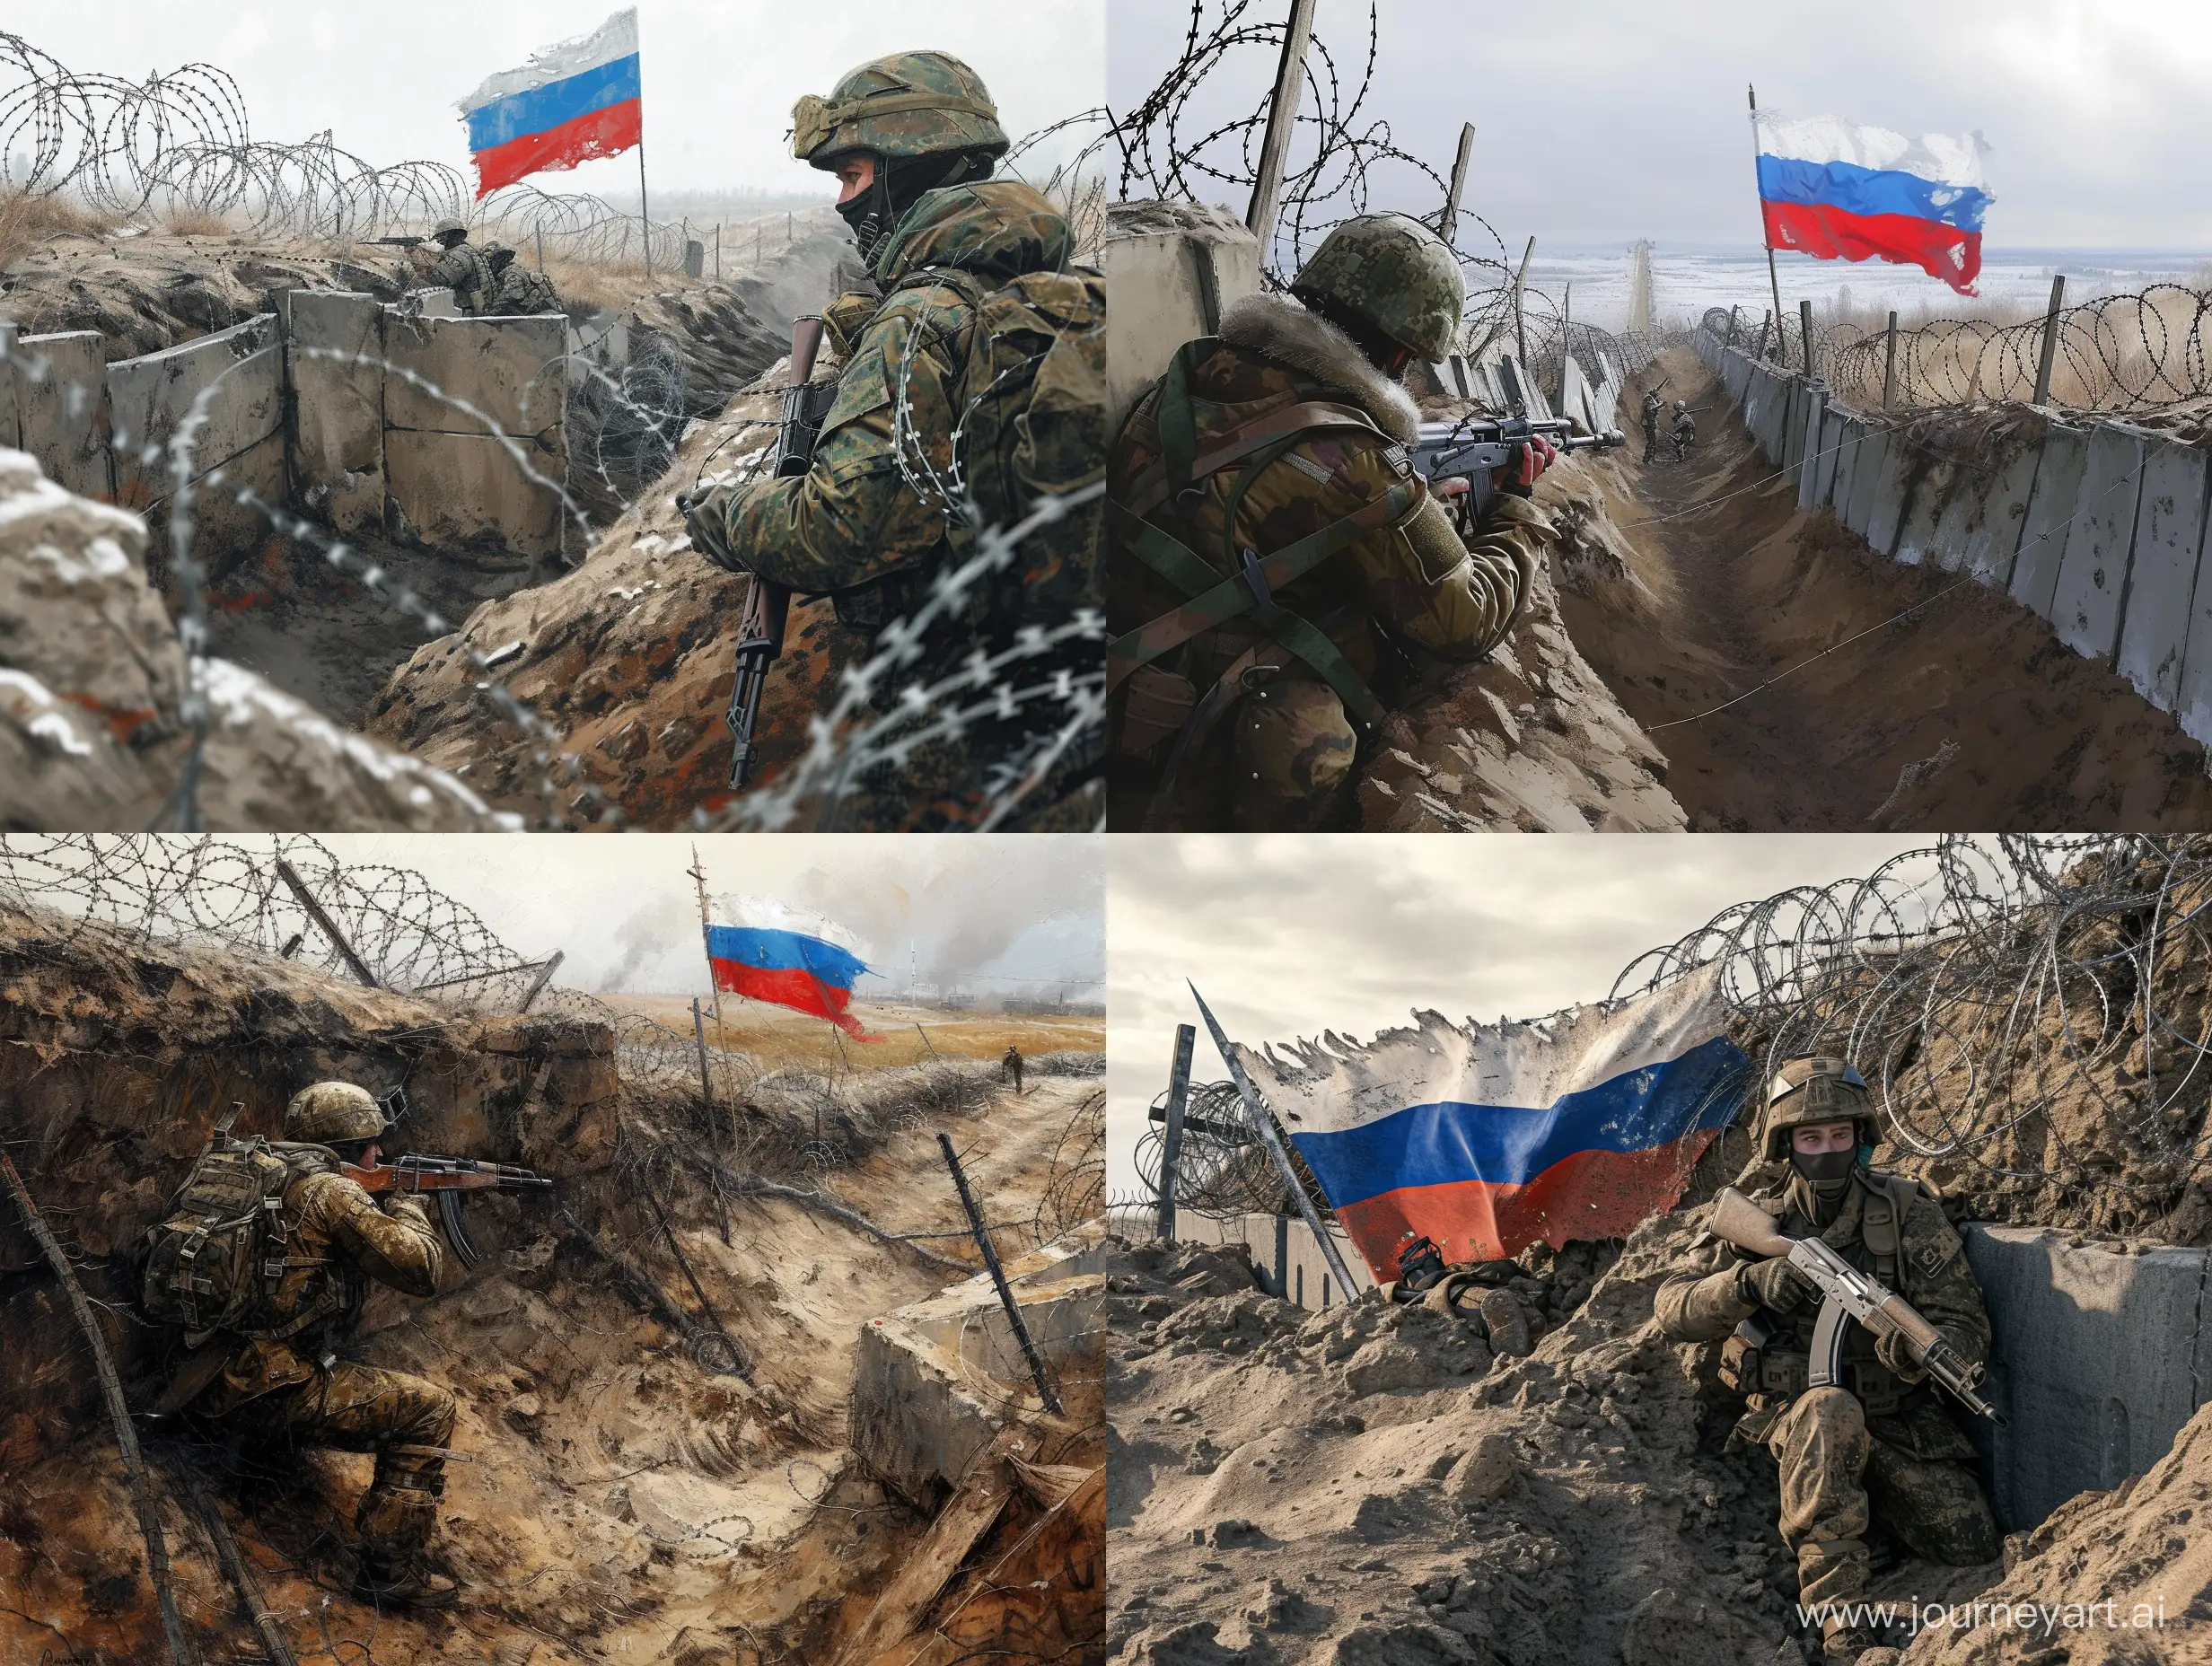 Photorealism, Russia, Modernity, Trench, Fortification, Barbed Wire, Concrete Barriers, Checkpoint, Russian Flag, Russian Army Soldier, Modern Military Equipment, EMR Camouflage, Ratnik Equipment, Weapons in Hands, AK, Kalashnikov